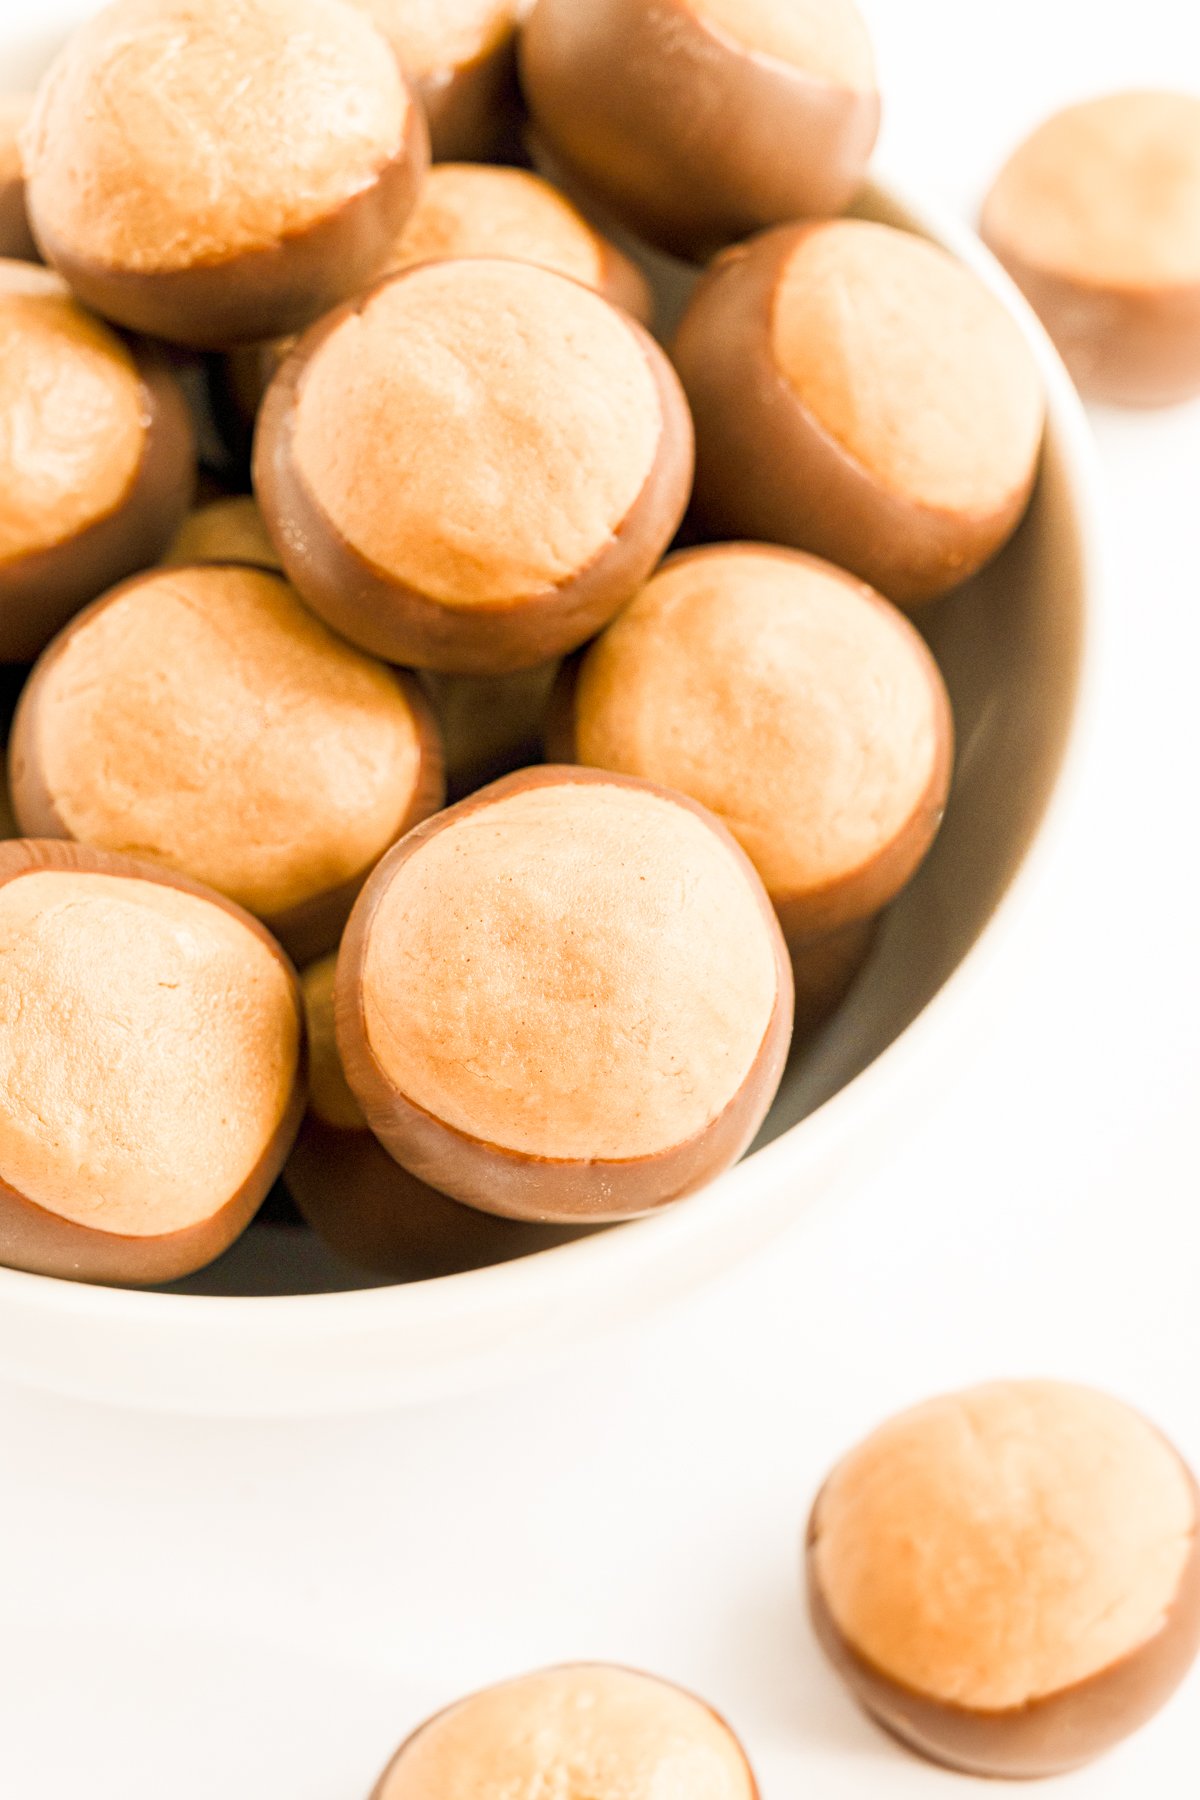 Buckeye recipe - Peanut butter balls in a bowl on a white surface.